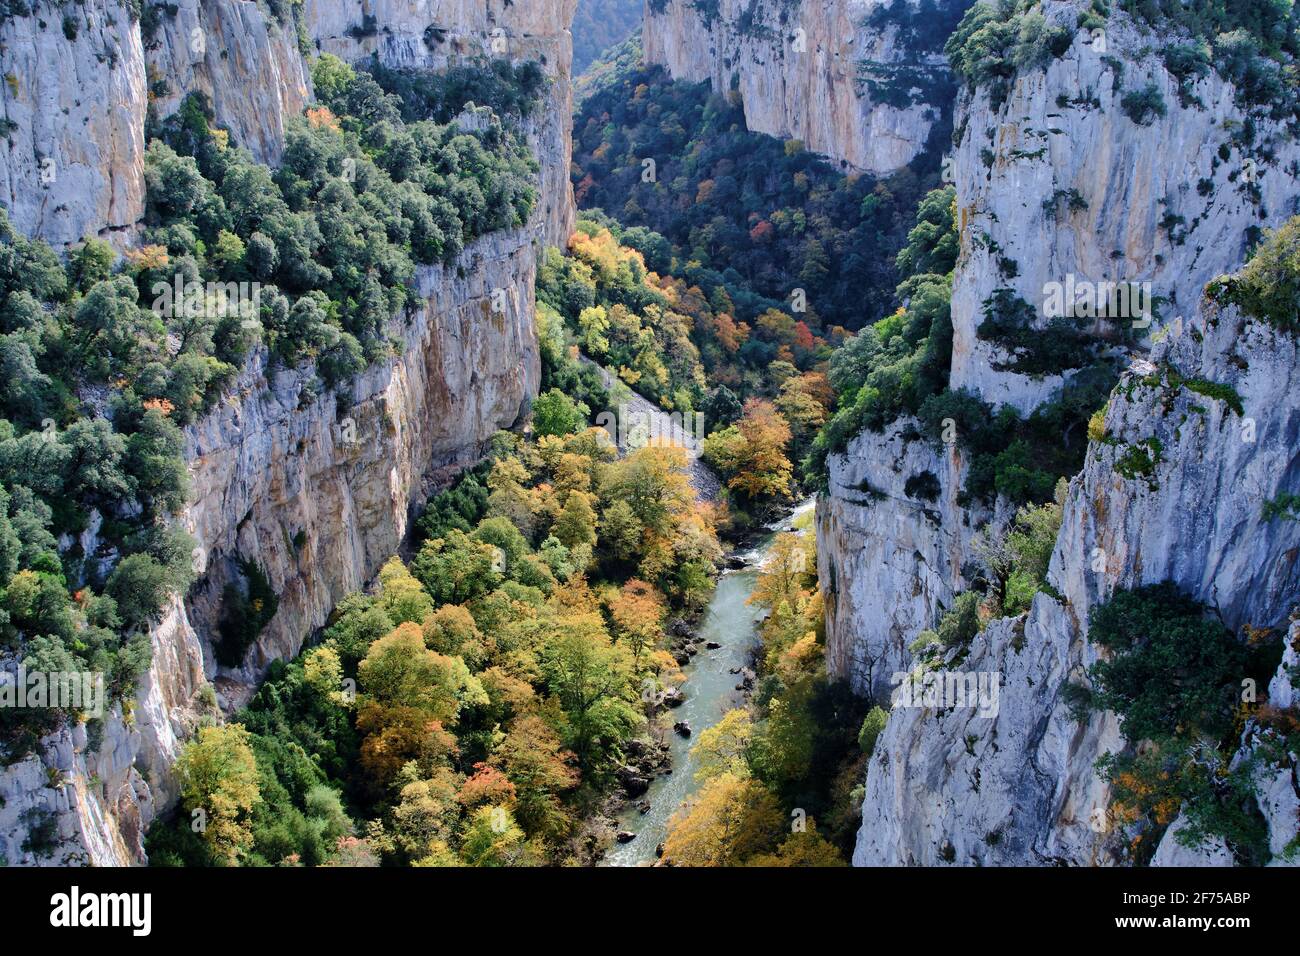 Gorge and river with decidual forest in autumn. Arbayun gorge. Navarre, Spain, Europe. Stock Photo